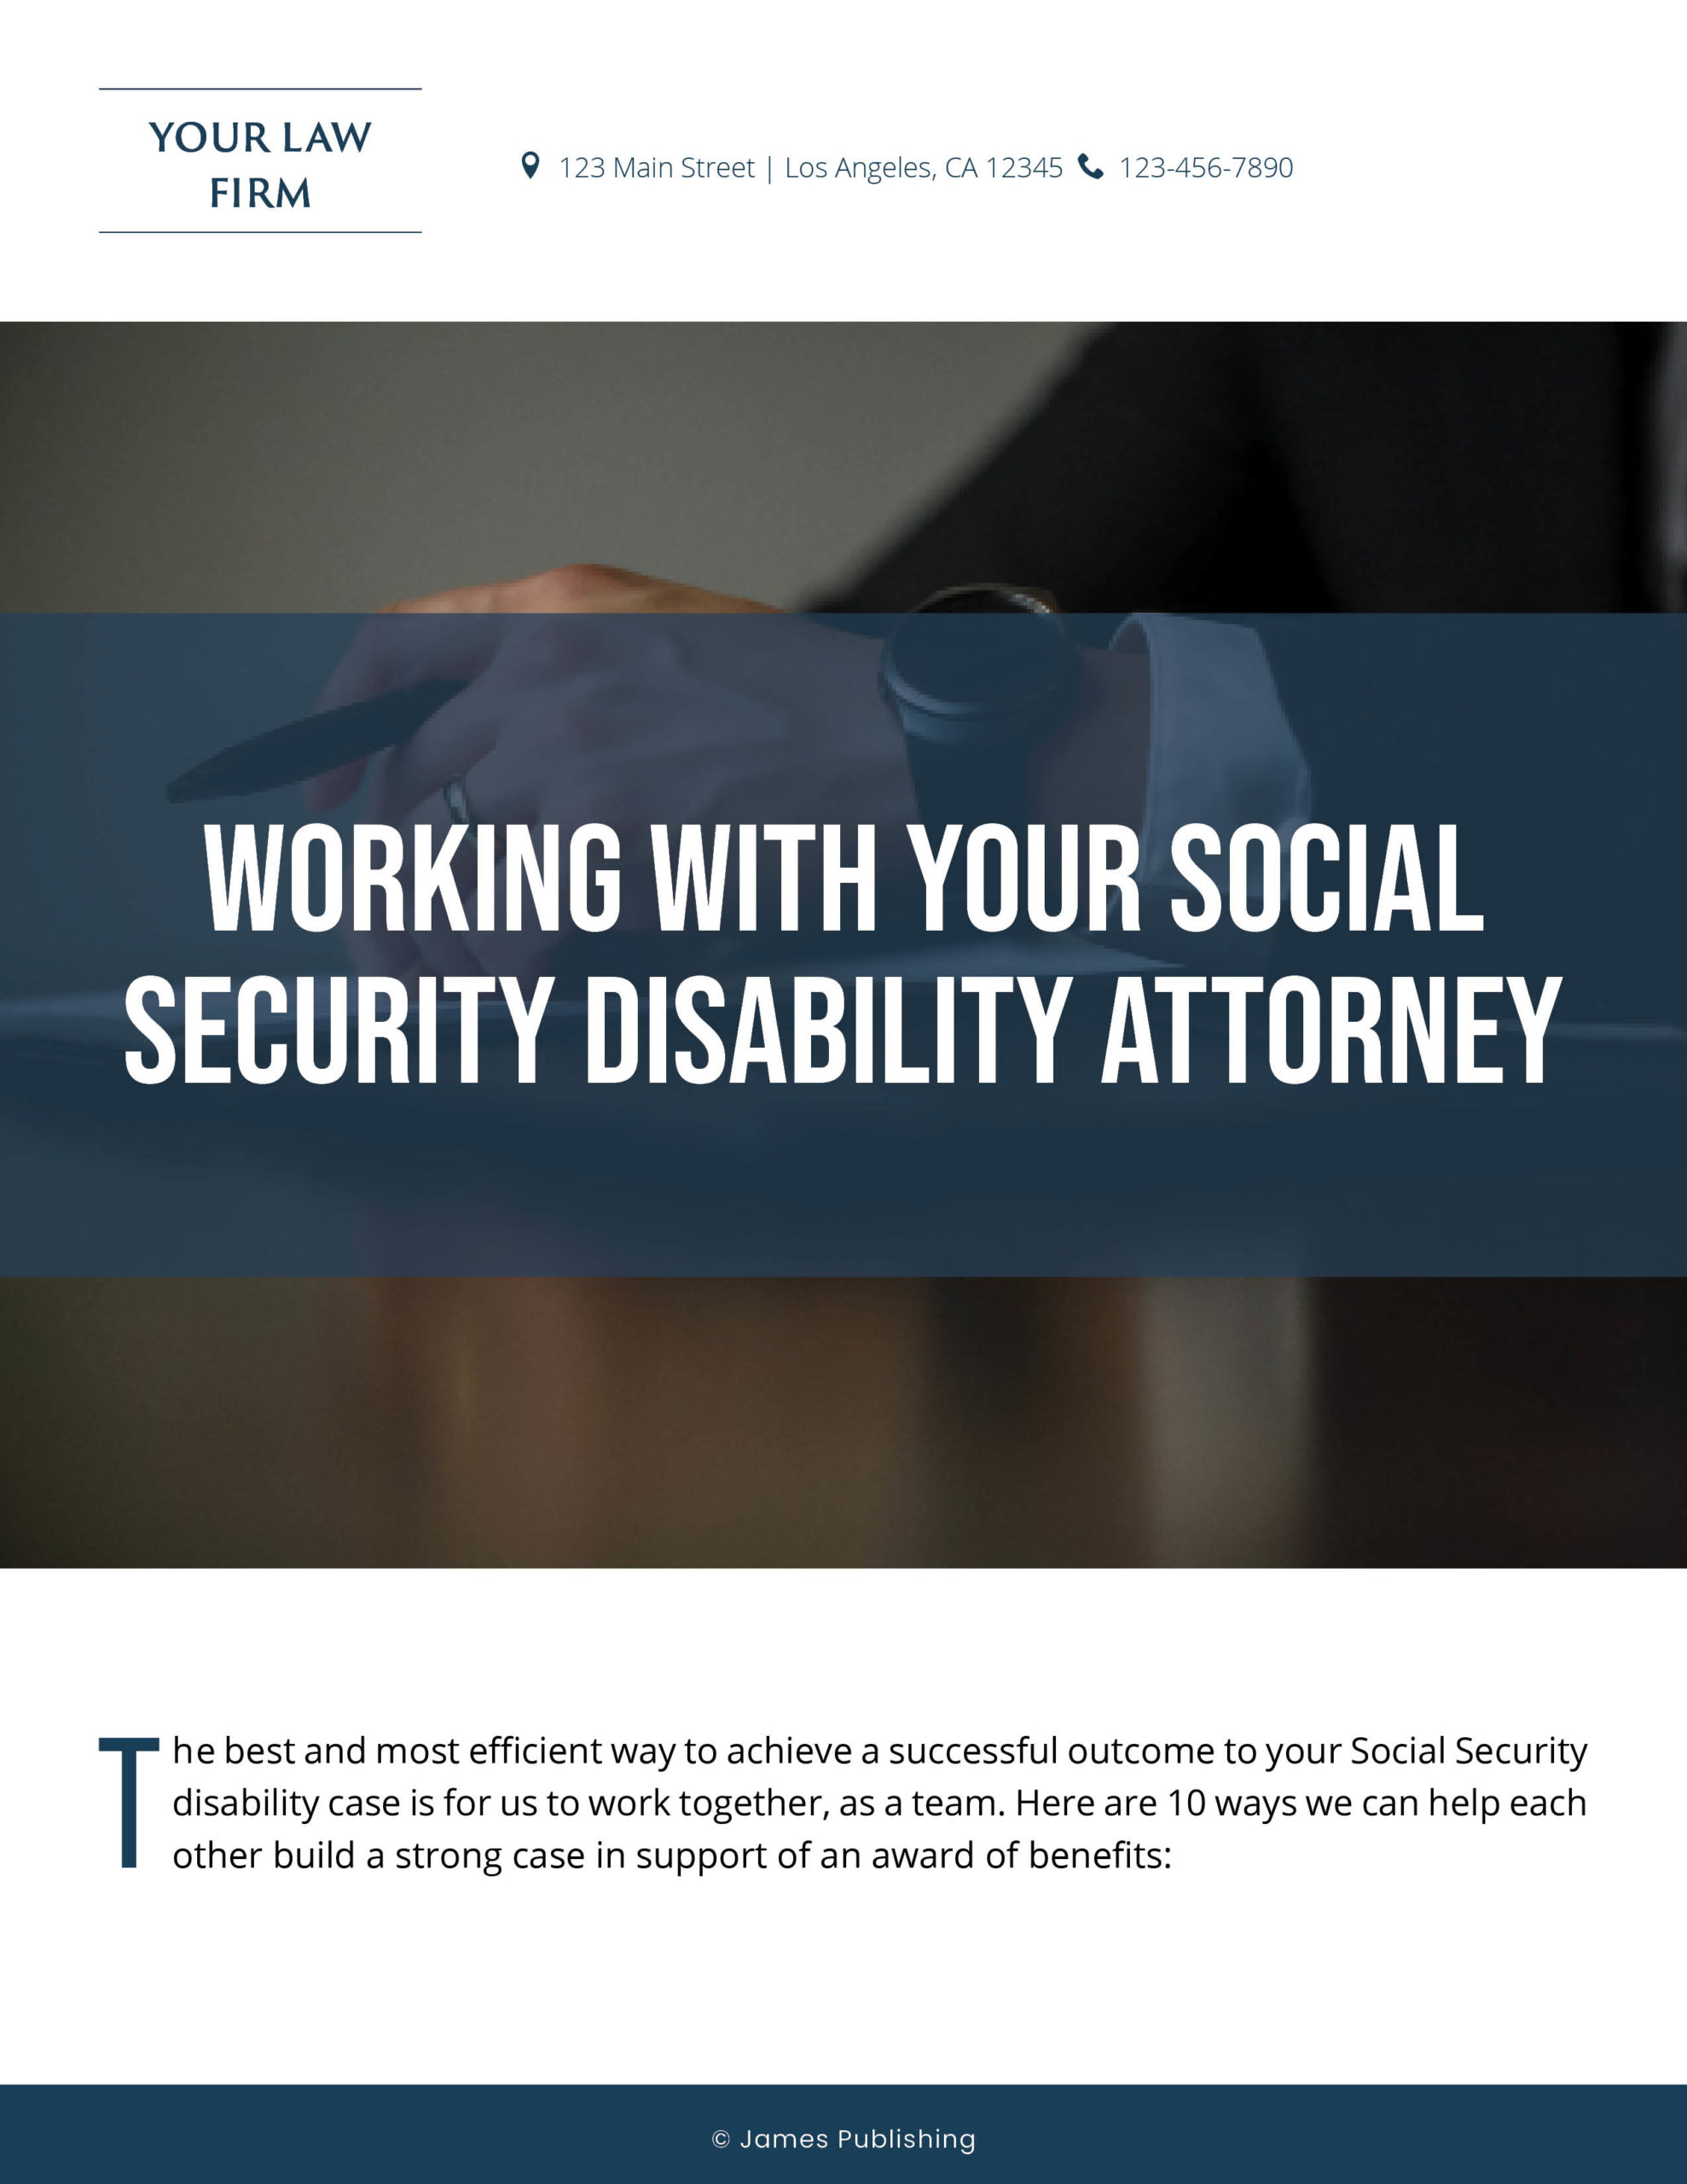 SSD-13 Working With Your Social Security Disability Attorney